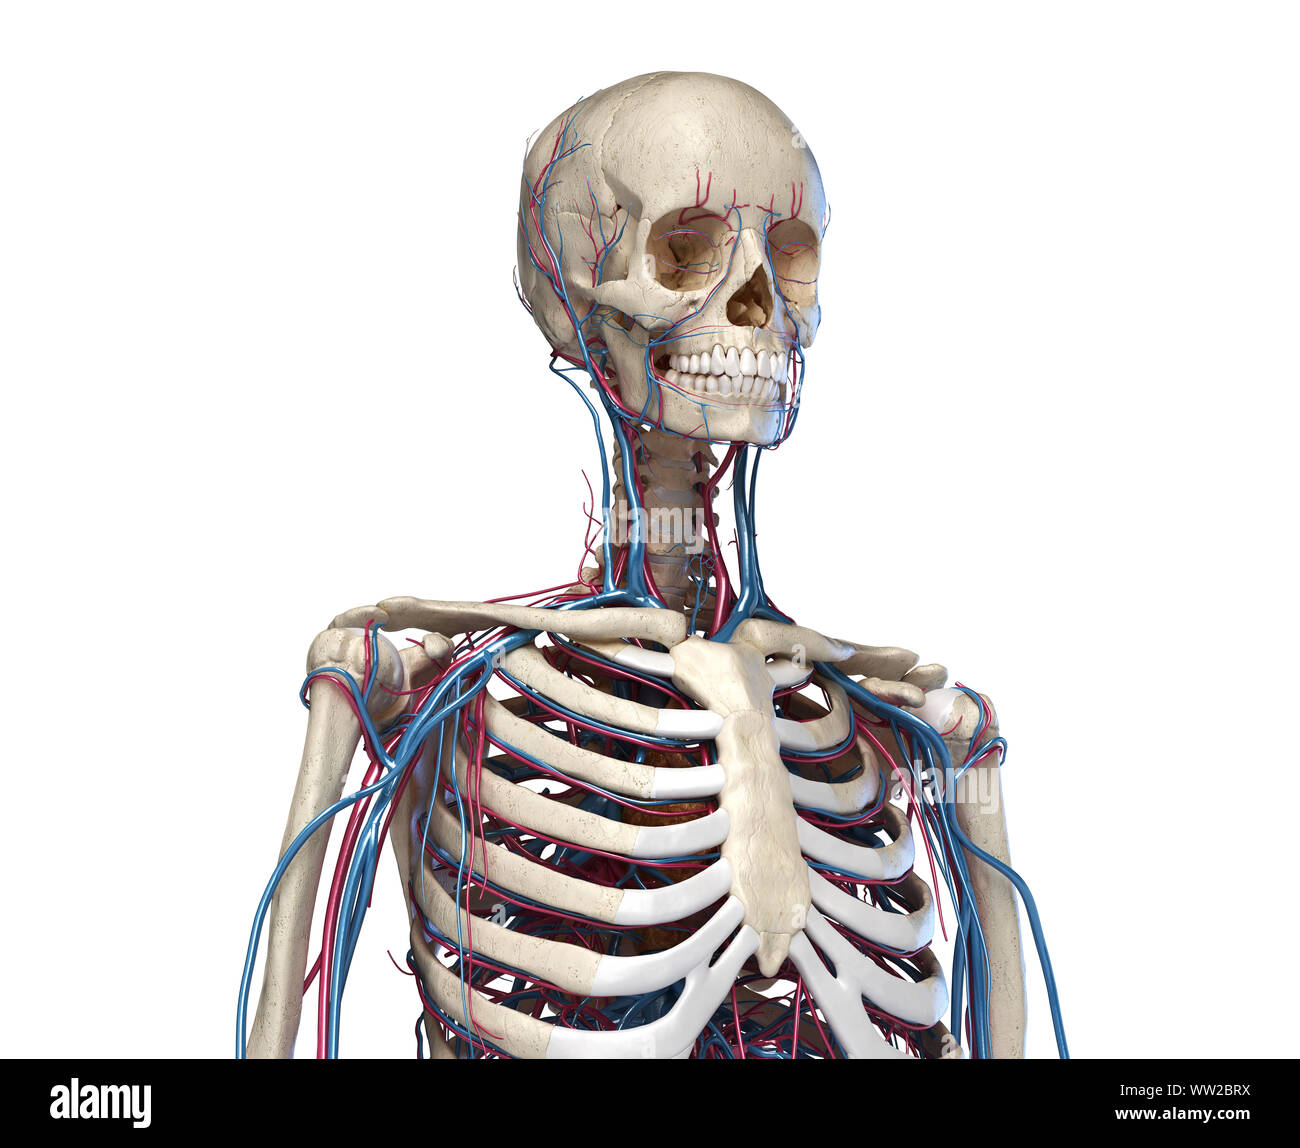 Human anatomy. Skeleton of the torso with veins and arteries. Front perspective view. On white background. 3d illustration. Stock Photo